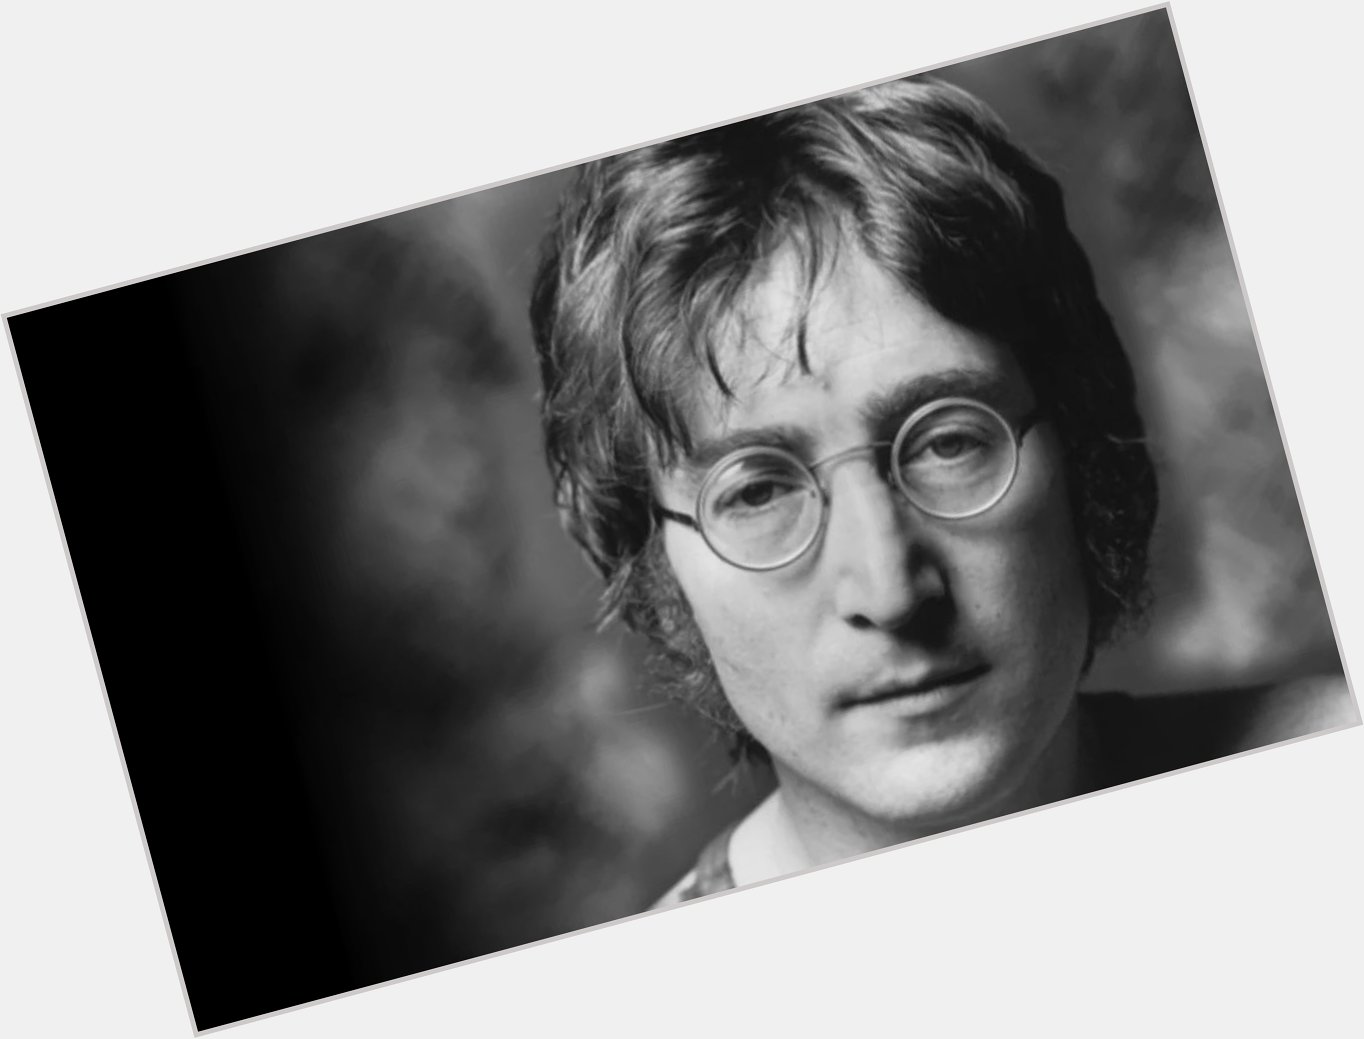 Happy birthday, John Lennon  Today would have been 82nd birthday. 